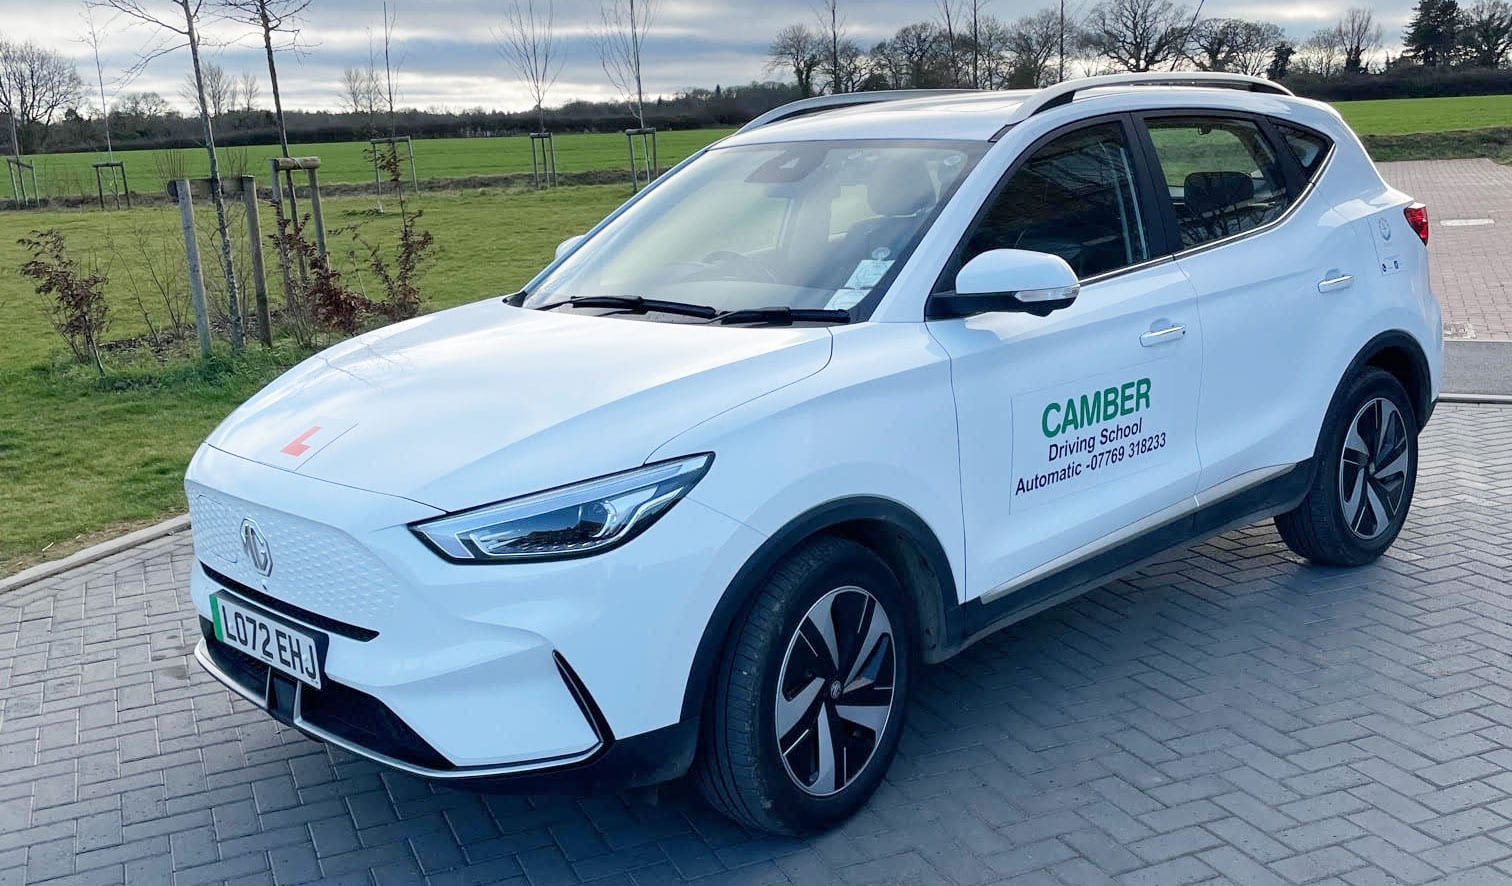 Camber Automatic Driving School in Witney, Oxfordshire